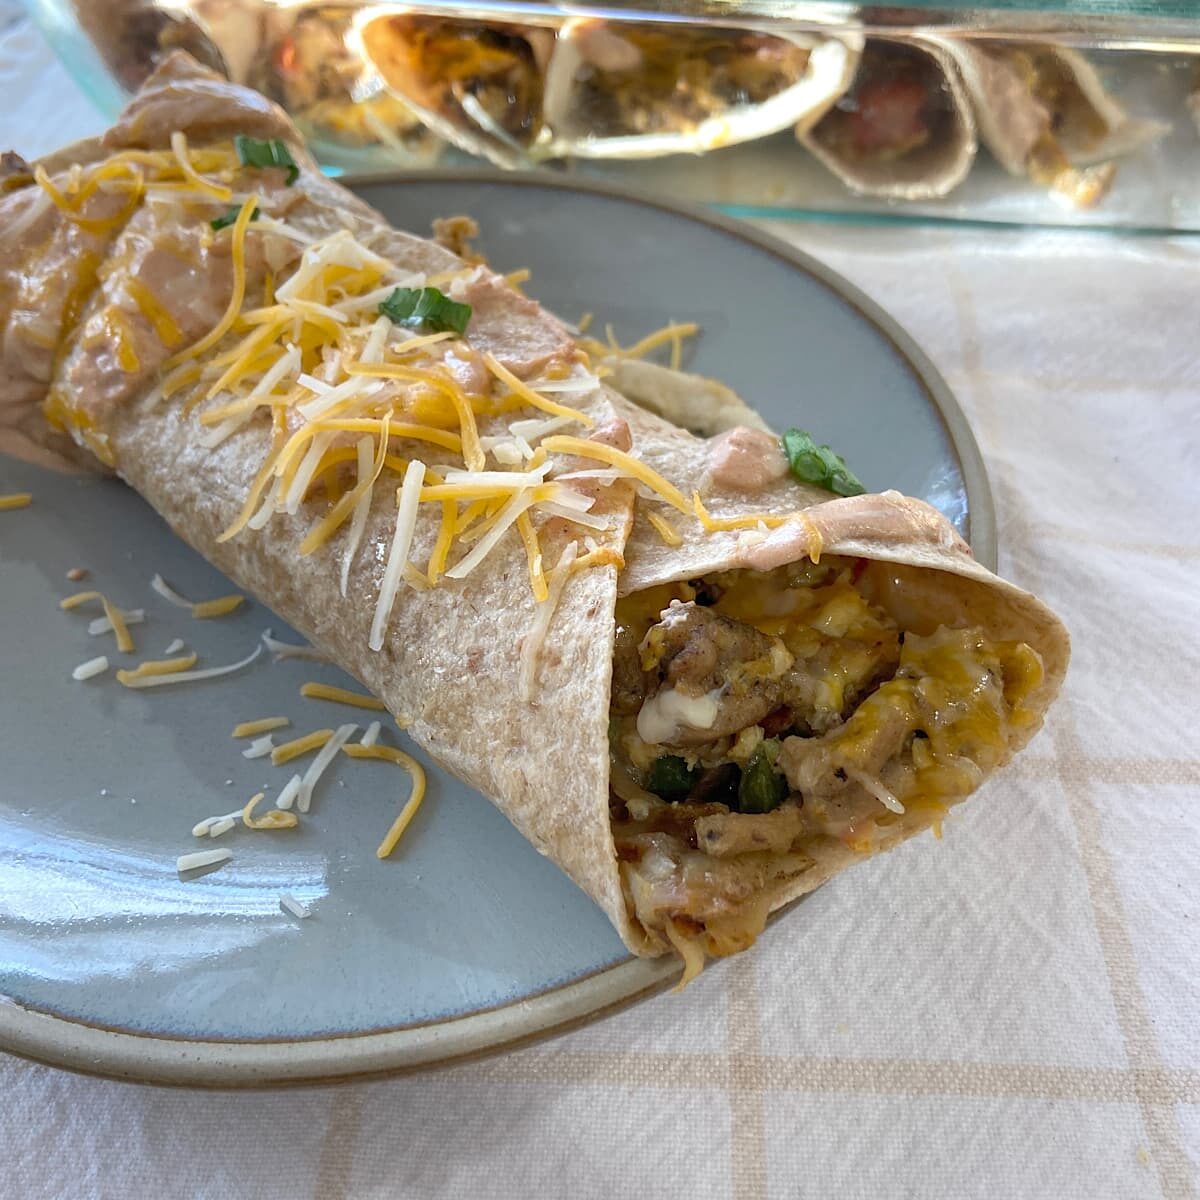 breakfast burrito on plate with pan of burritos in background.